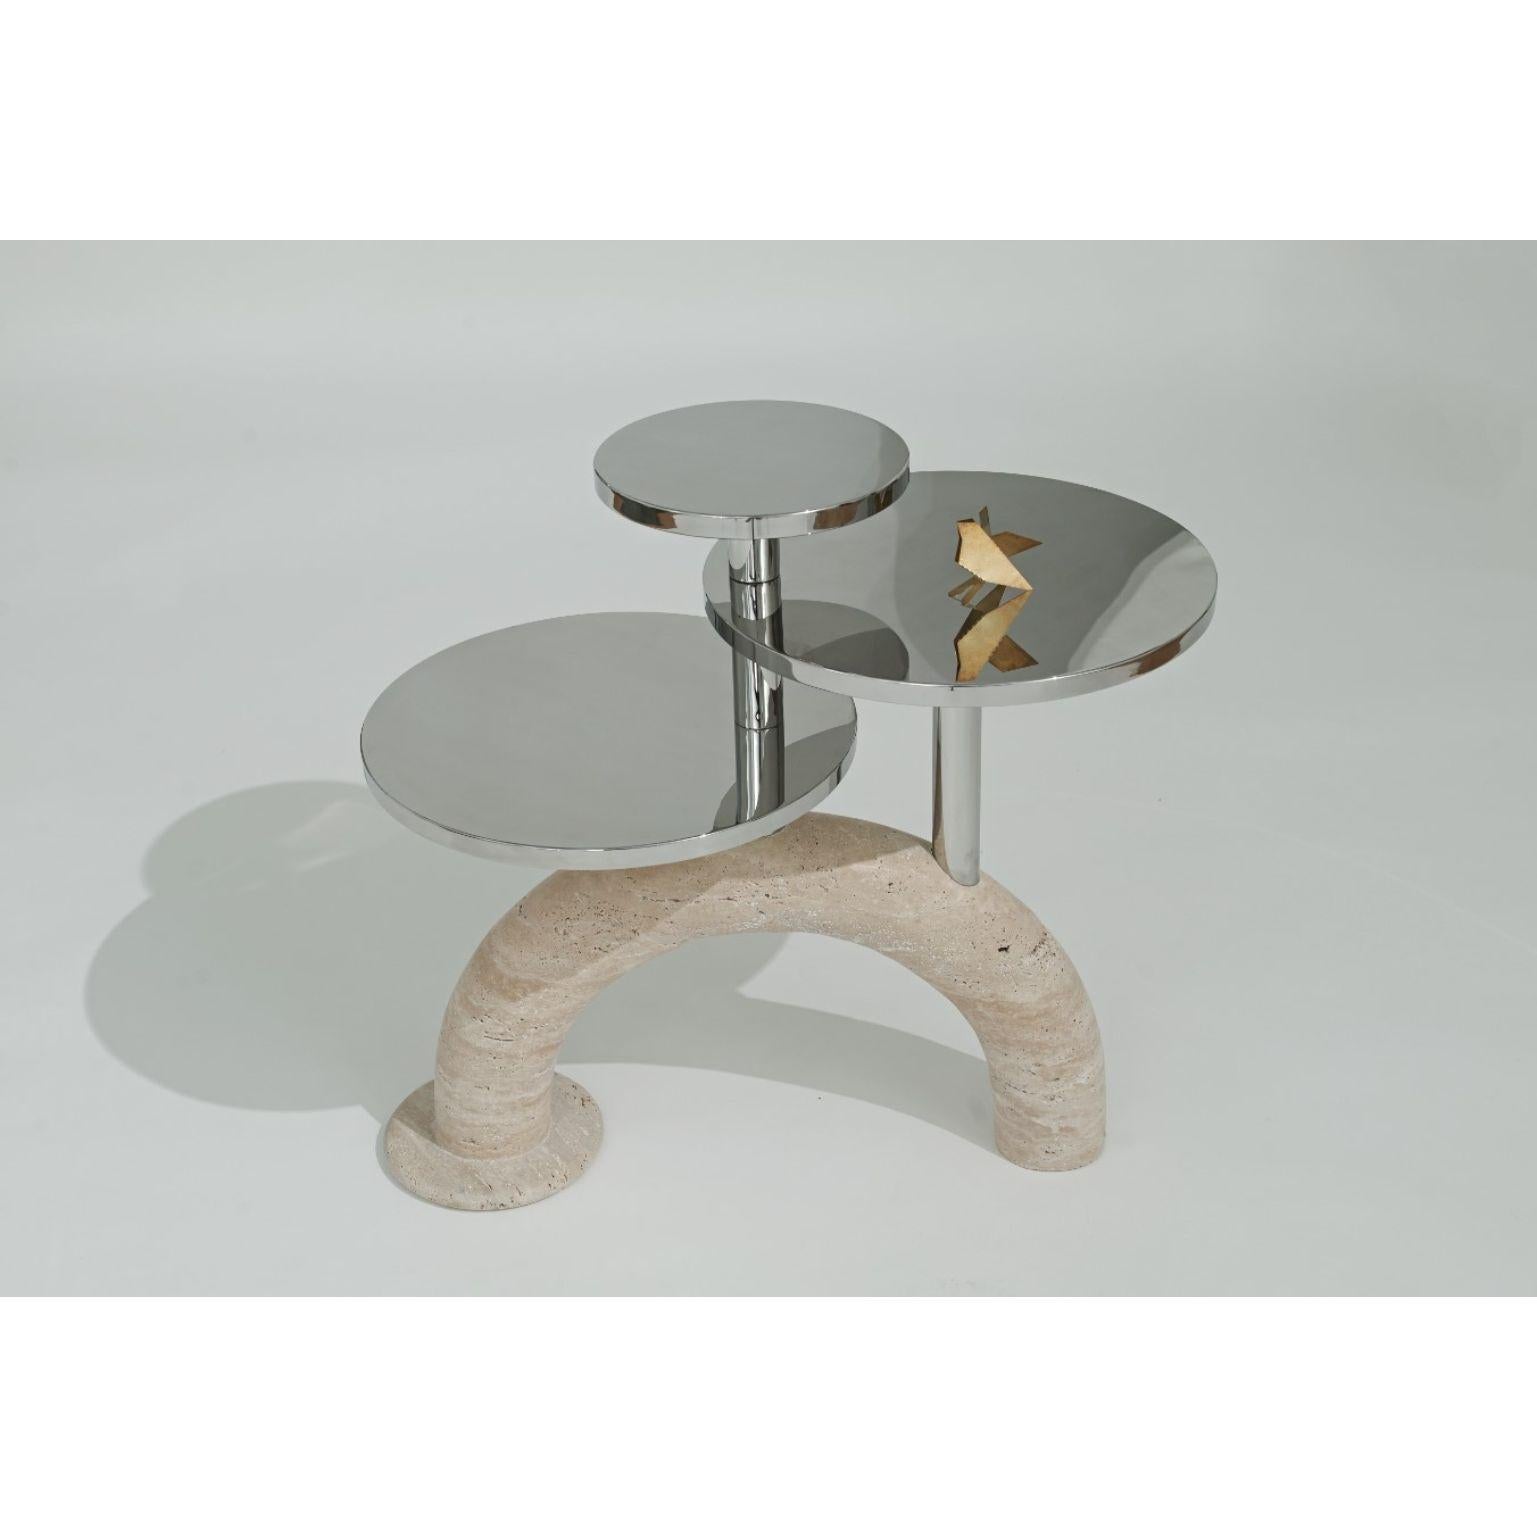 Dimanche 6 - Side table by Marc Dibeh
Materials: Travertino marble, mirror, chromed stainless steel
Dimensions: W68 x H40 x D40 cm 

Beirut based designer Marc Dibeh narrates his cultural environment through compelling interiors and